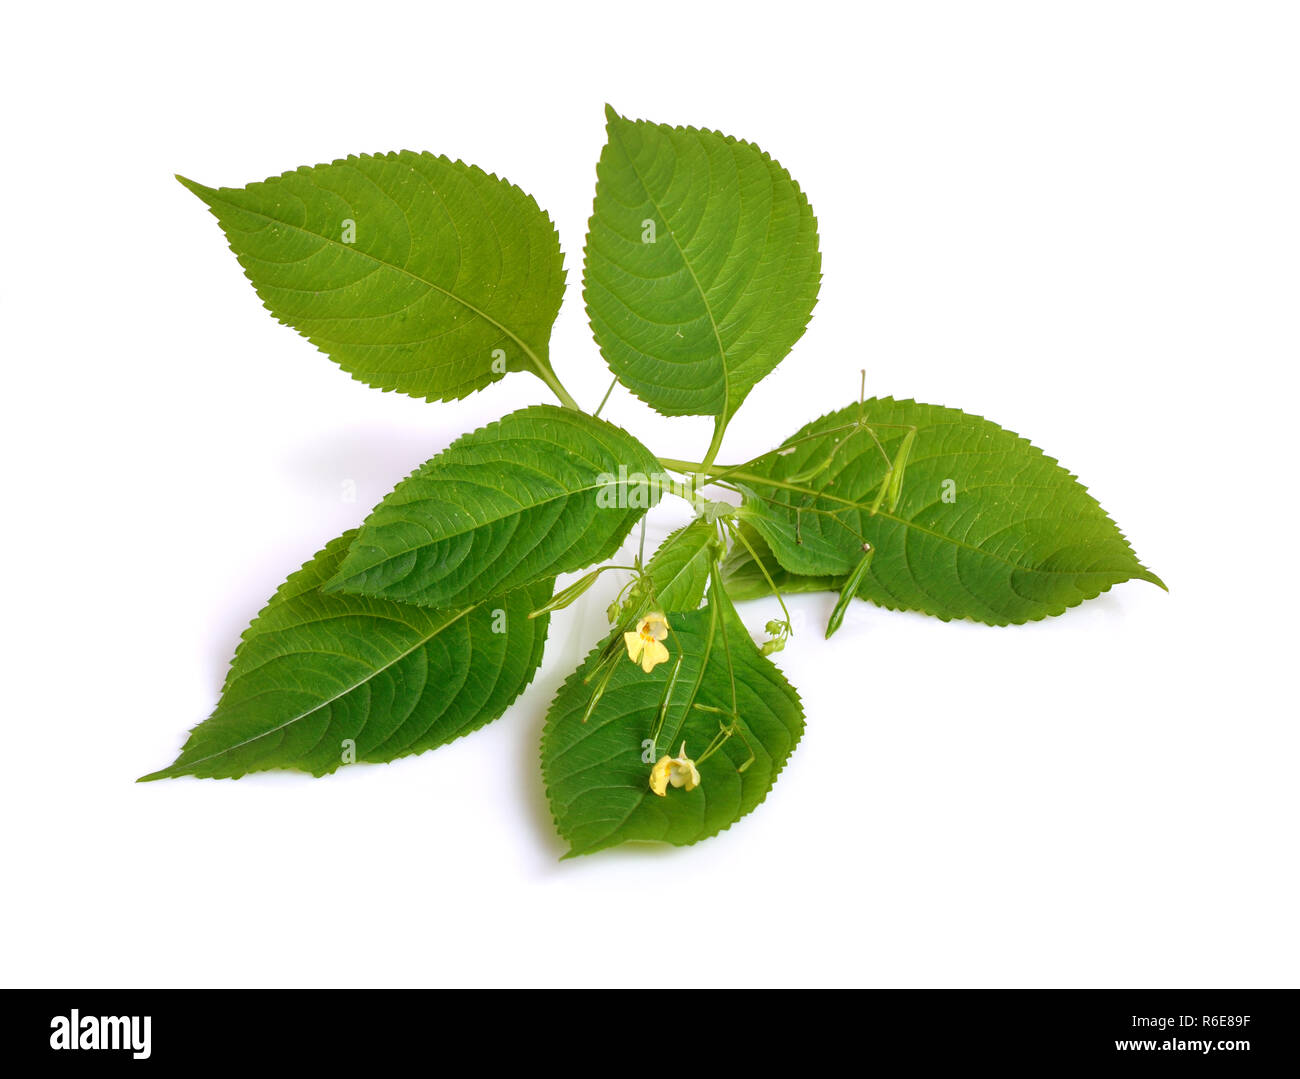 Impatiens. Noms communs : impatiens, jewelweed, touch-me-not, snapweed, patience. Isolées. Banque D'Images